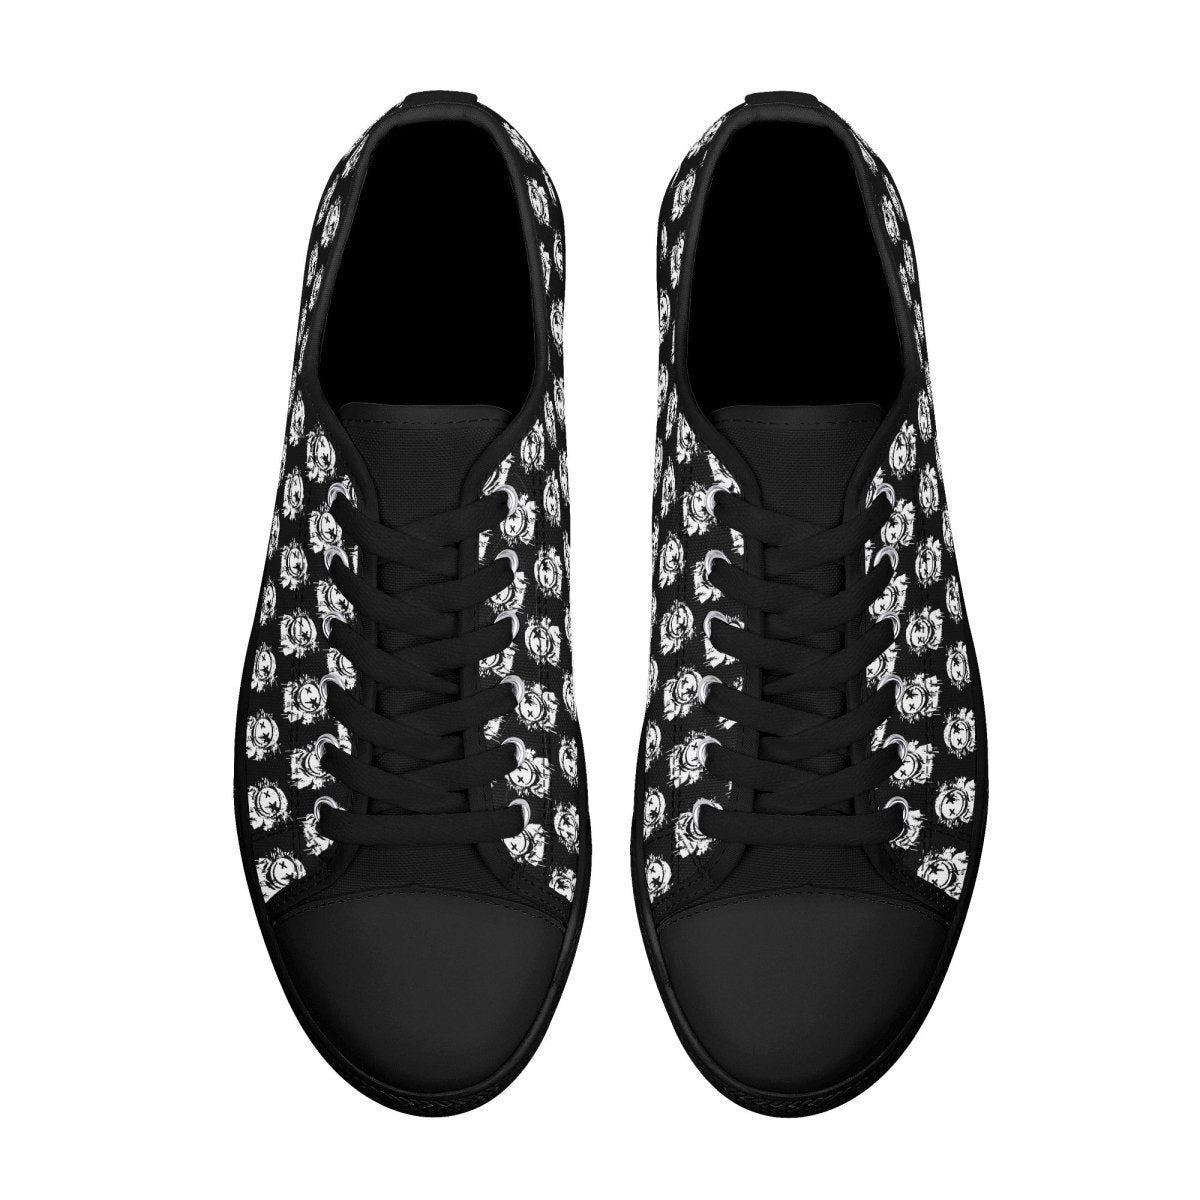 Mens Low MH Pattern Shoes Black - Mainly High